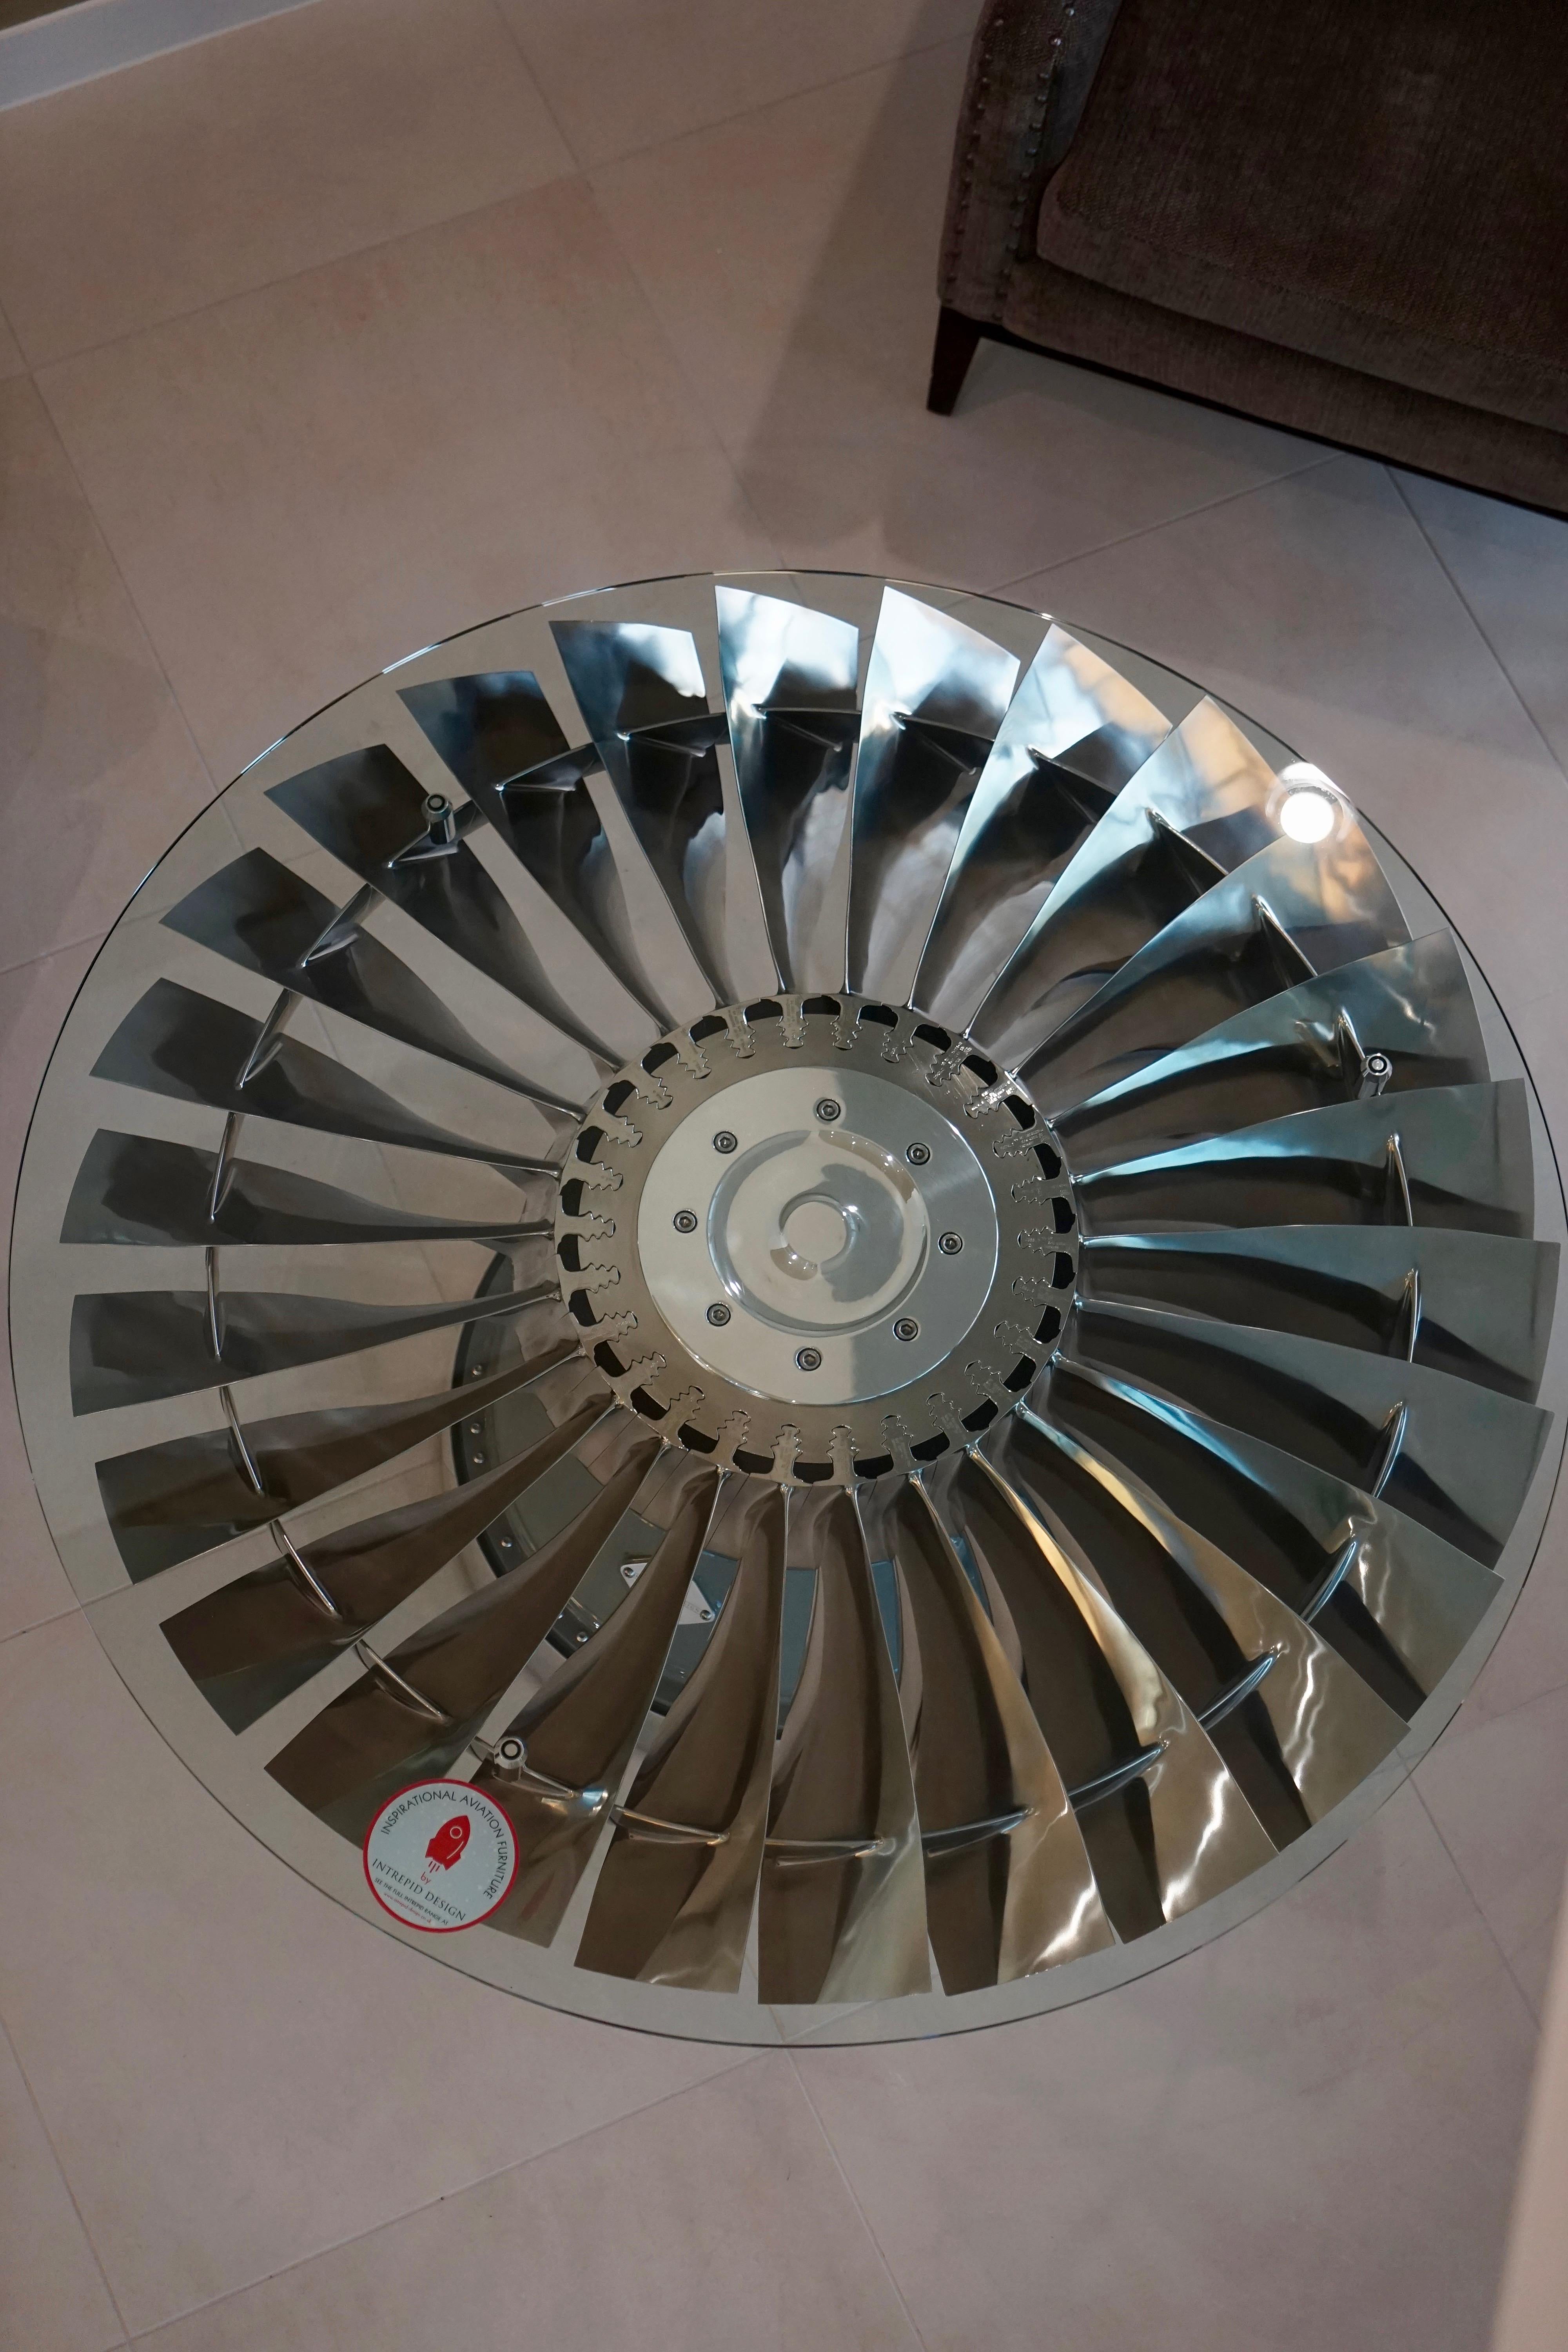 Harrier Jump Jet Pegasus LP1 Fan Blade, positioned on its original hub from within the jet engine. 

Simply stunning coffee table with 26 individual polished titanium blades, positioned on top of an original painted harrier hub. Available with the